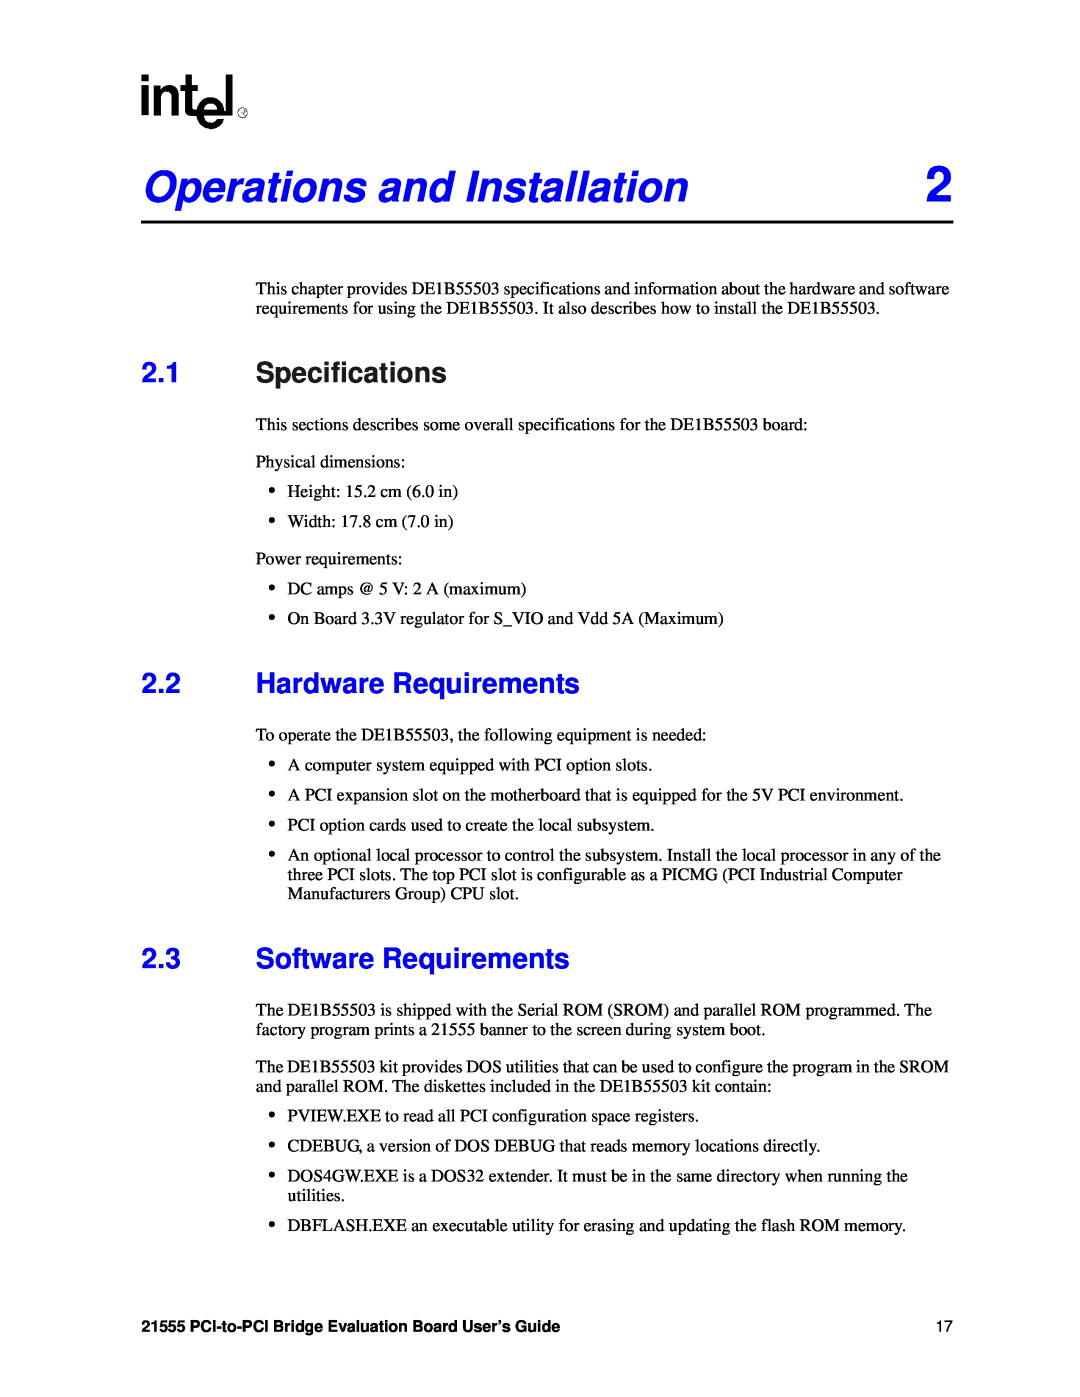 Intel 21555 manual Operations and Installation, Hardware Requirements, Software Requirements, Specifications 